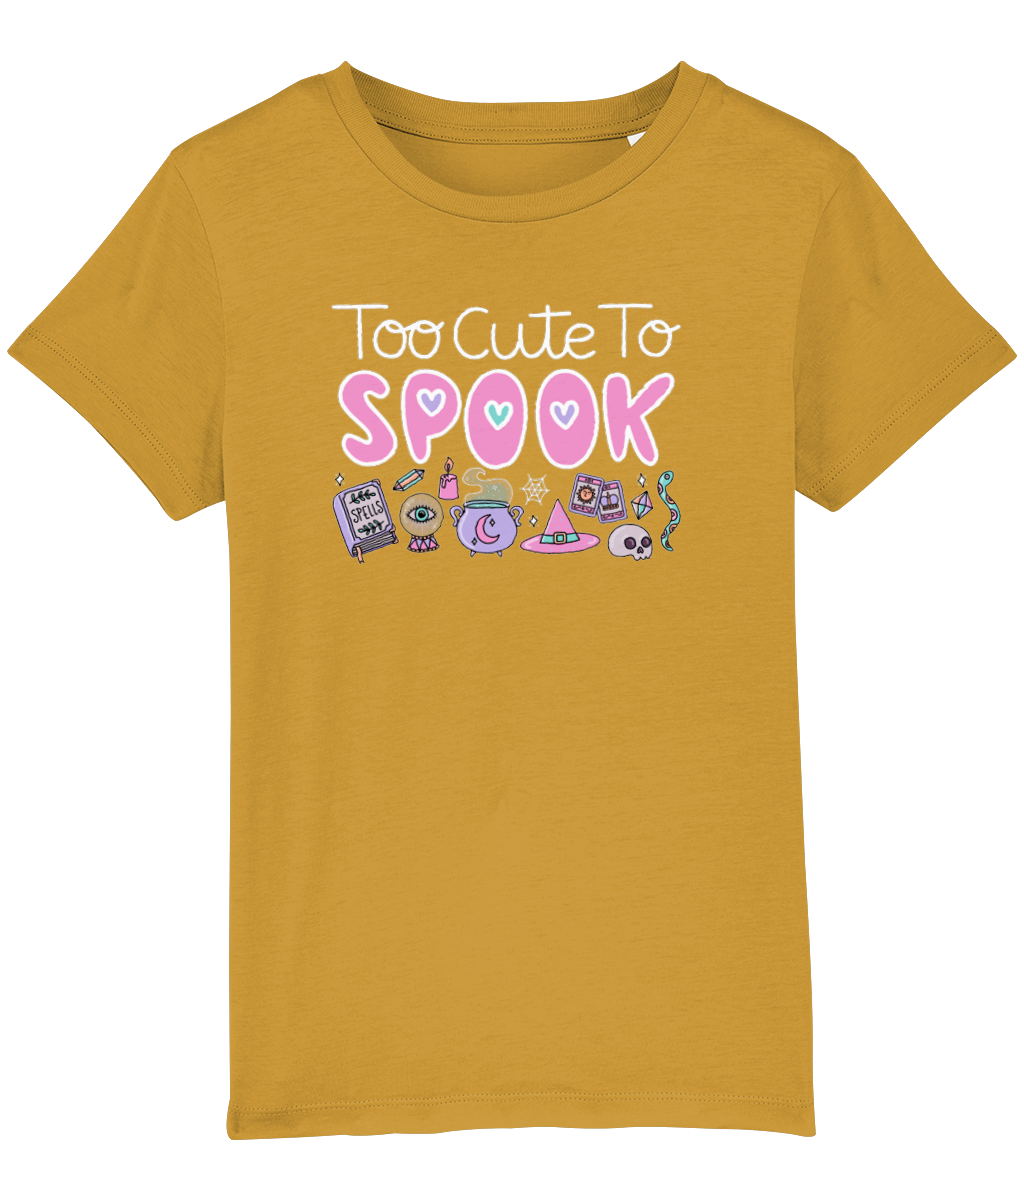 Spellbound Kids T-Shirt - Too Cute To Spook